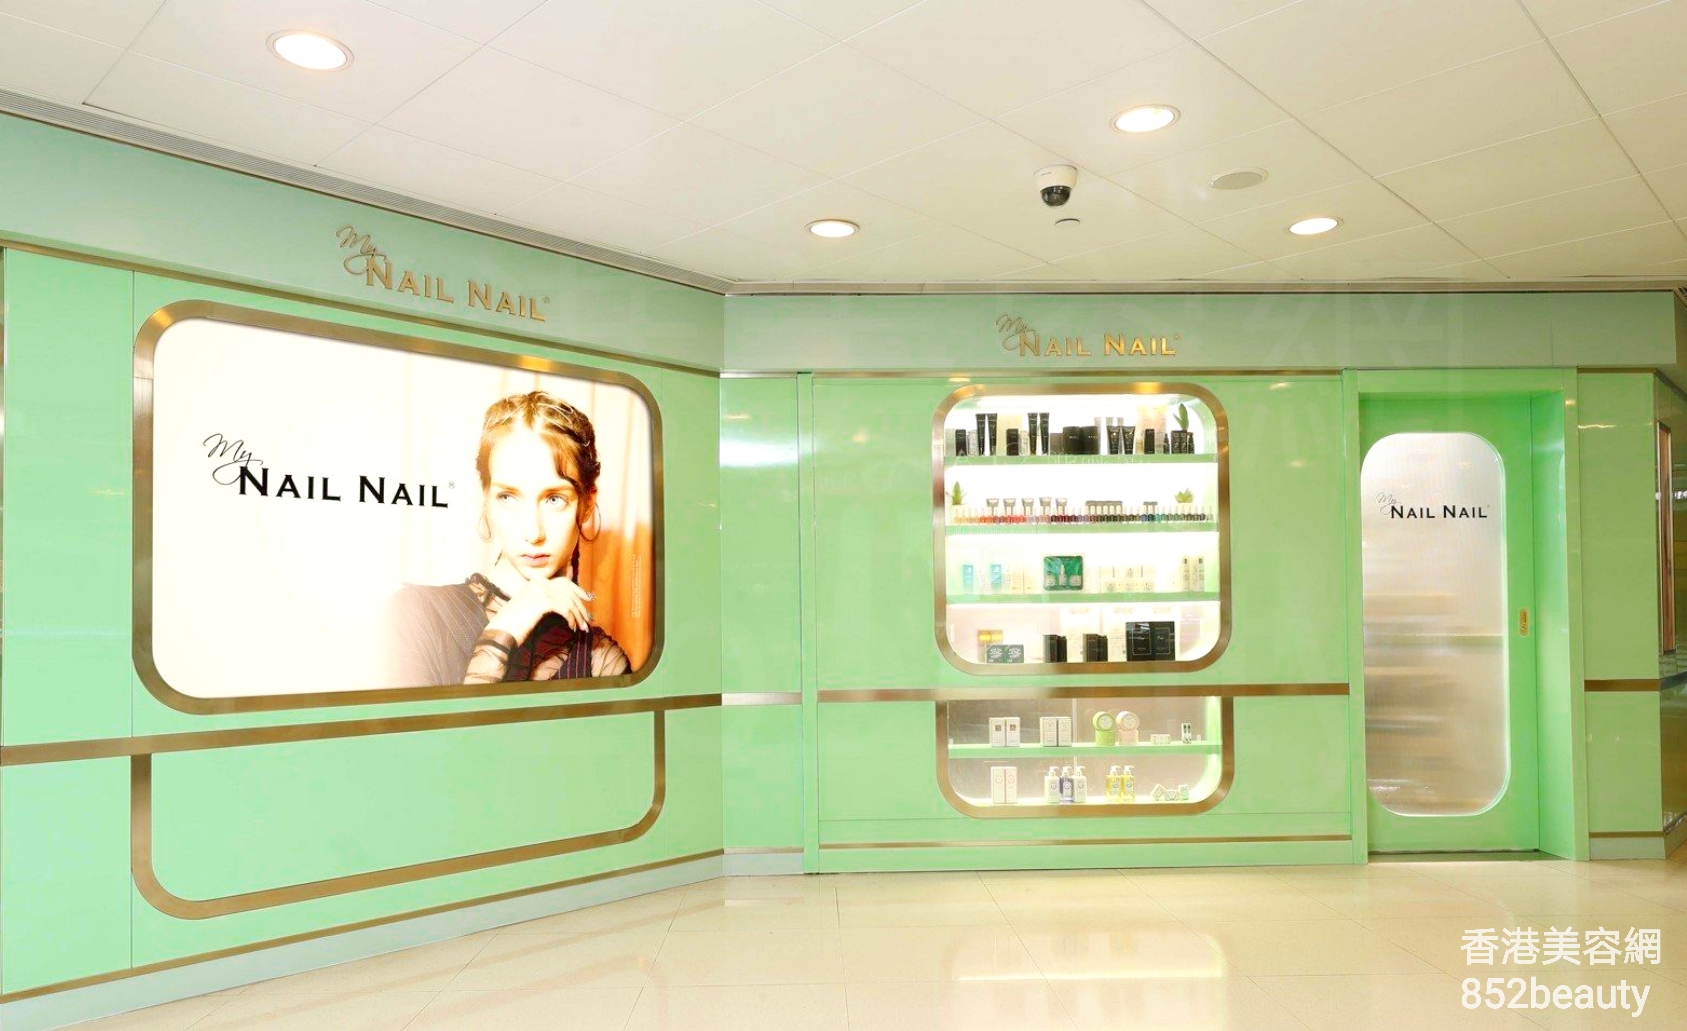 Manicure: Nail Nail (Central building)